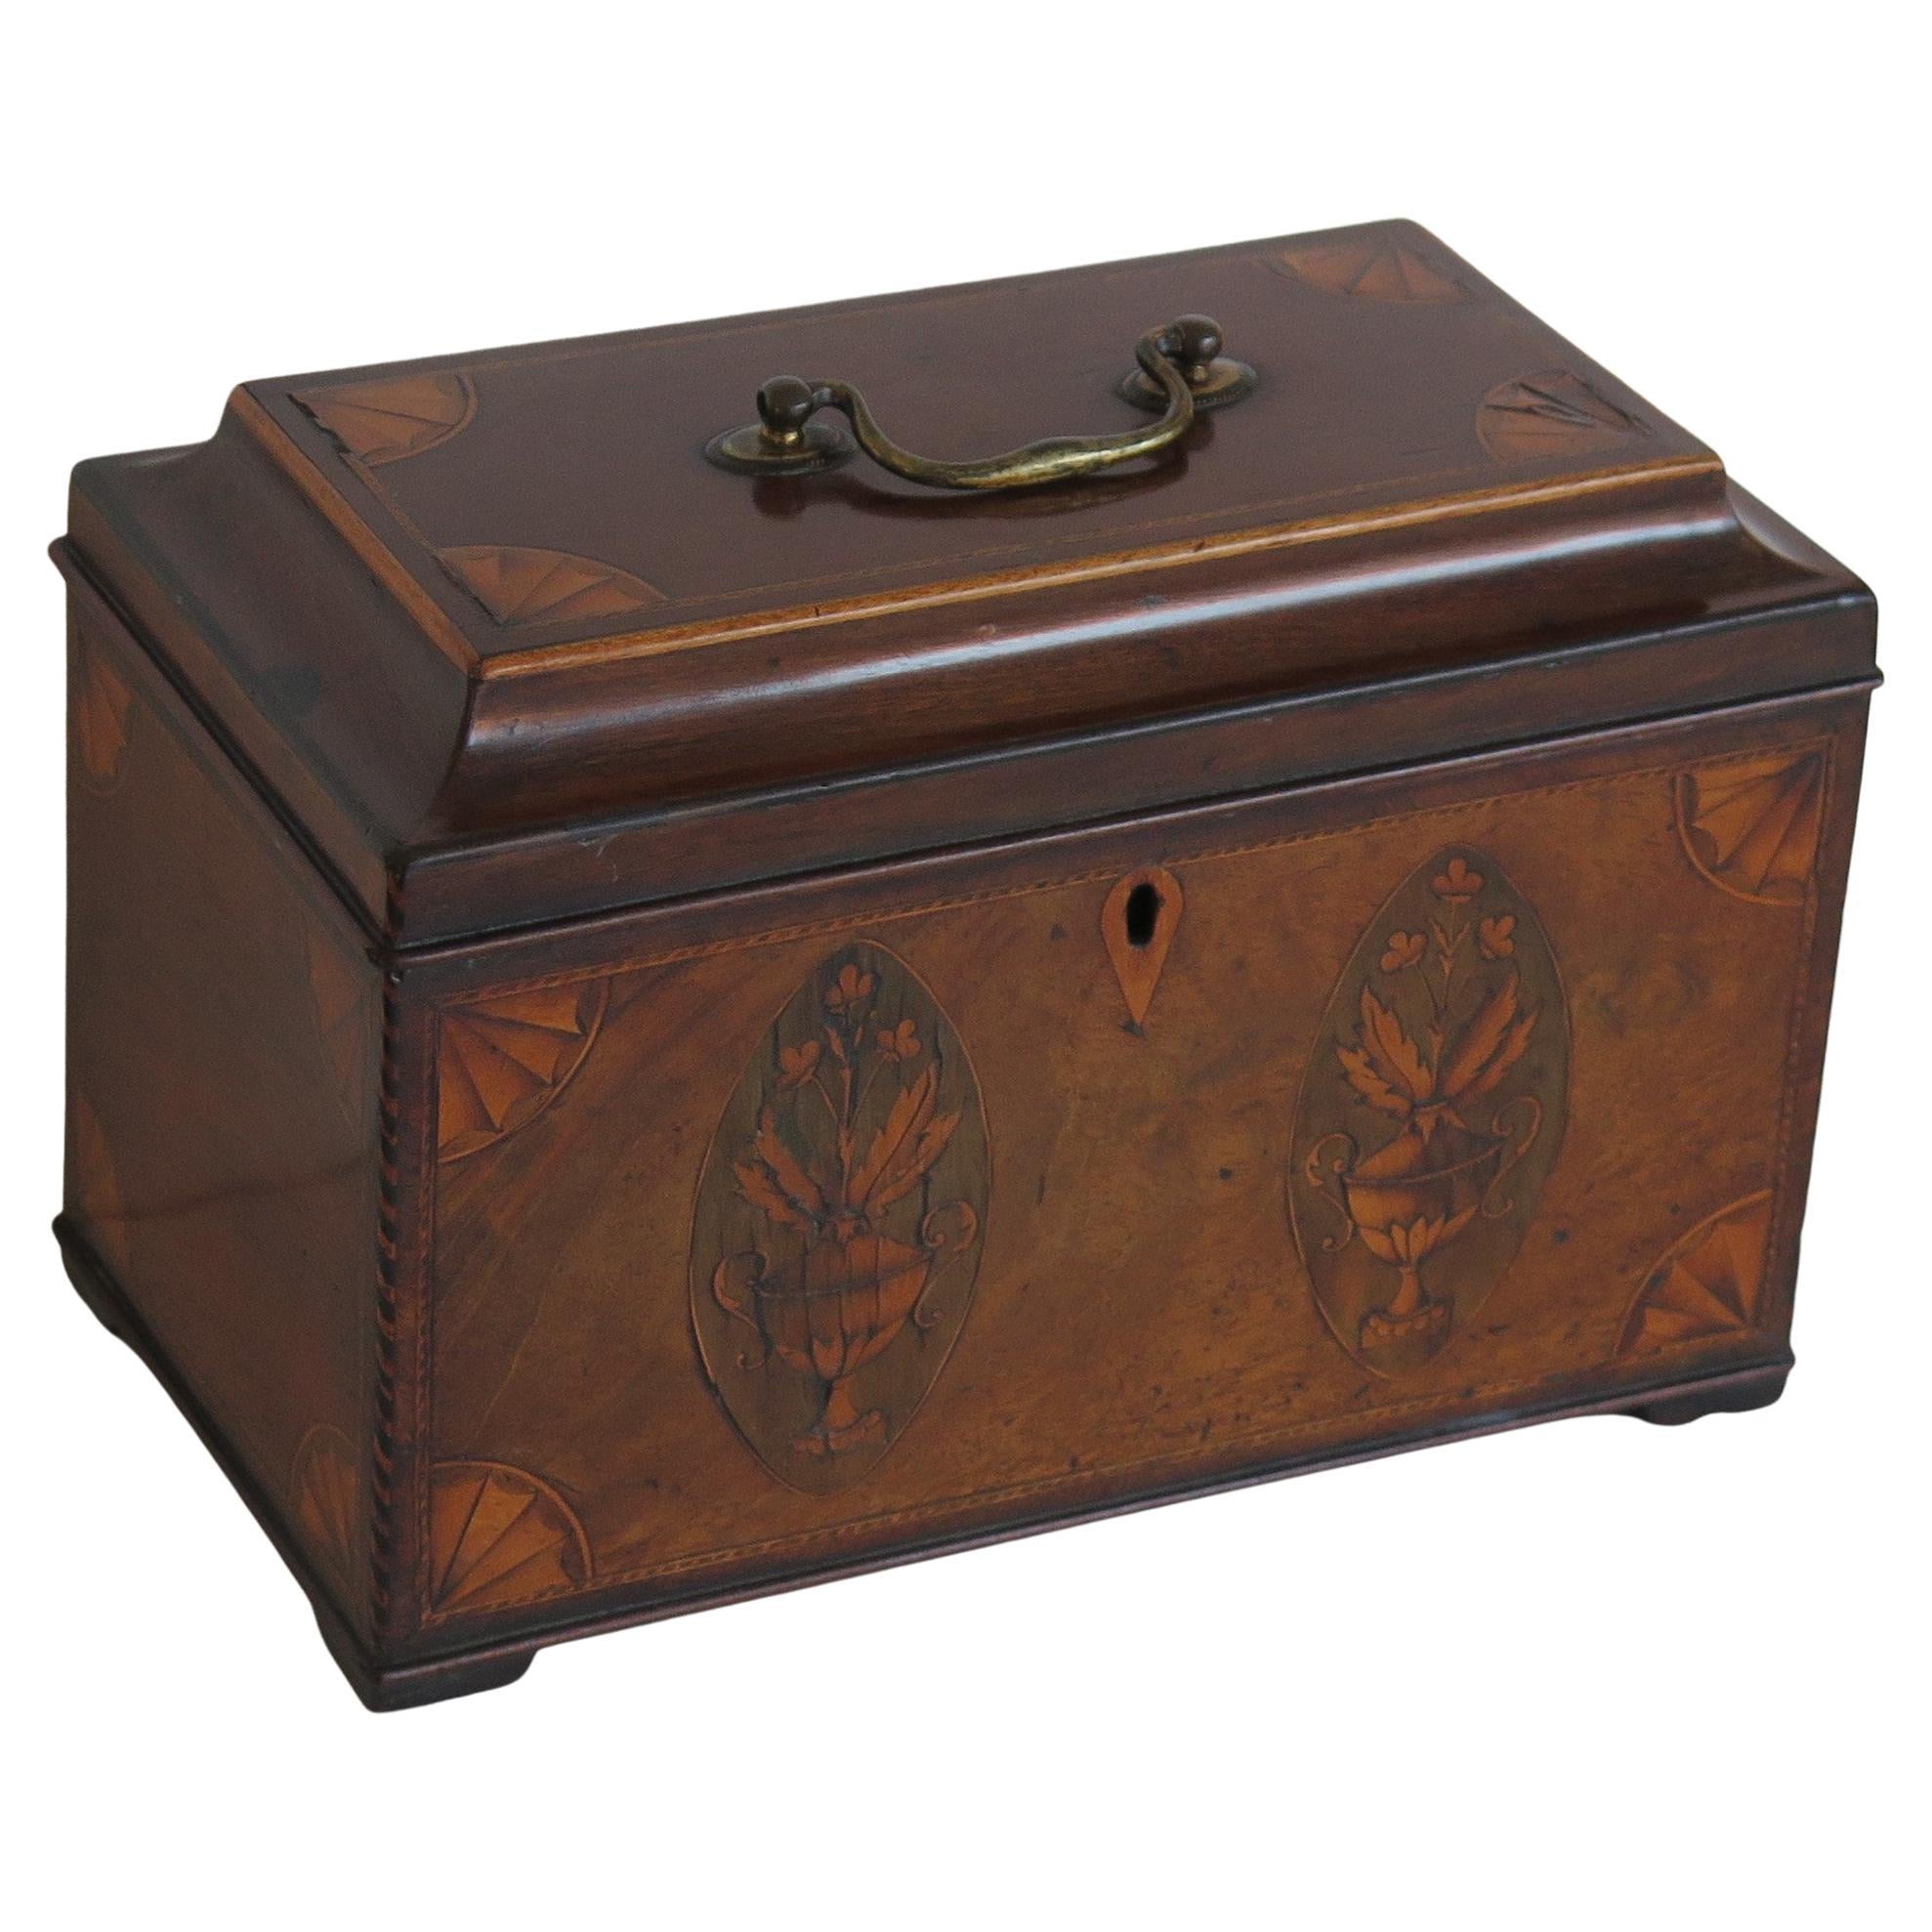 A very beautiful, fine quality, inlaid Tea Caddy from the English Georgian, Sheraton Period, Circa 1780.

The Tea Caddy is all handmade with very fine quality features;
* Beautifully chosen figured hardwoods.
* Exceptional inlays of Shells, Fan